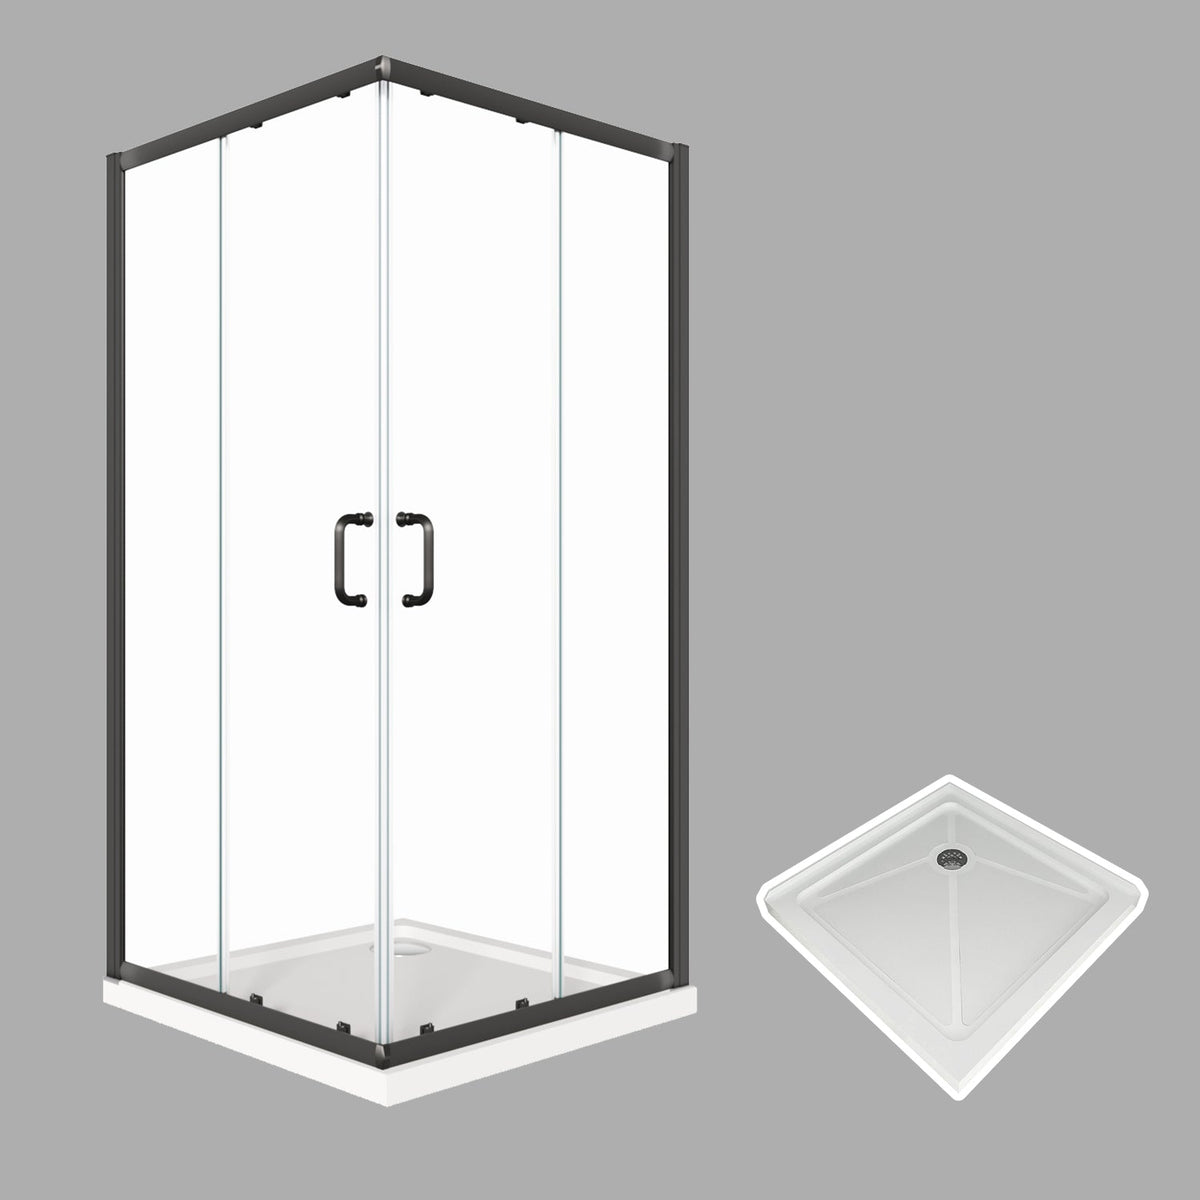 SUNNY SHOWER 34 in. W x 34 in. D x 72 in. H Black Finish Corner Entry Enclosure With Sliding Doors And White Square Base